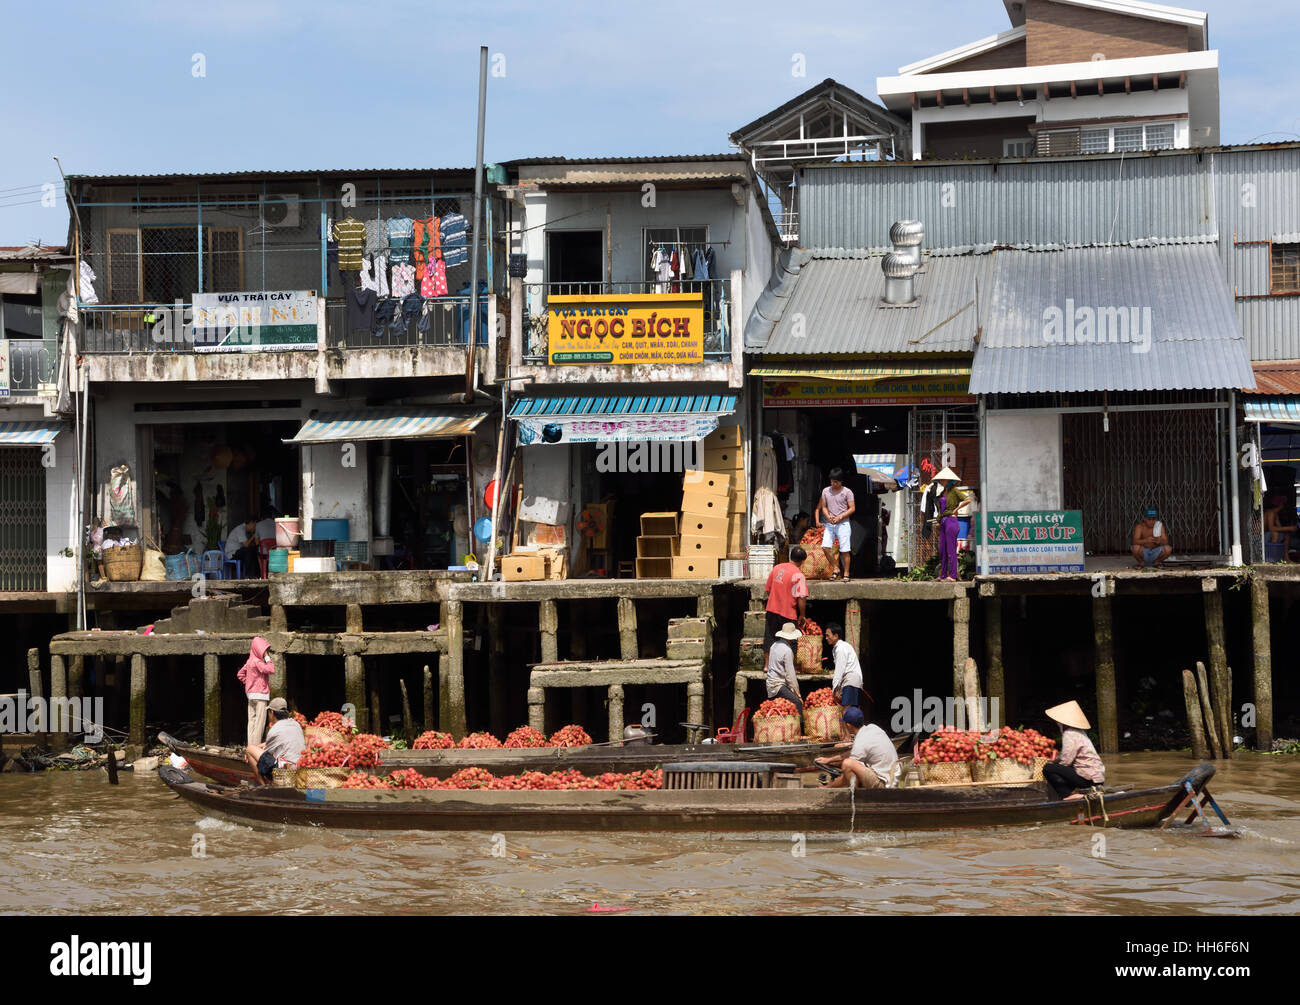 Can Tho is the biggest city in the Mekong Delta Vietnam ( Socialist Republic of Vietnam ) famous for its floating markets. Stock Photo